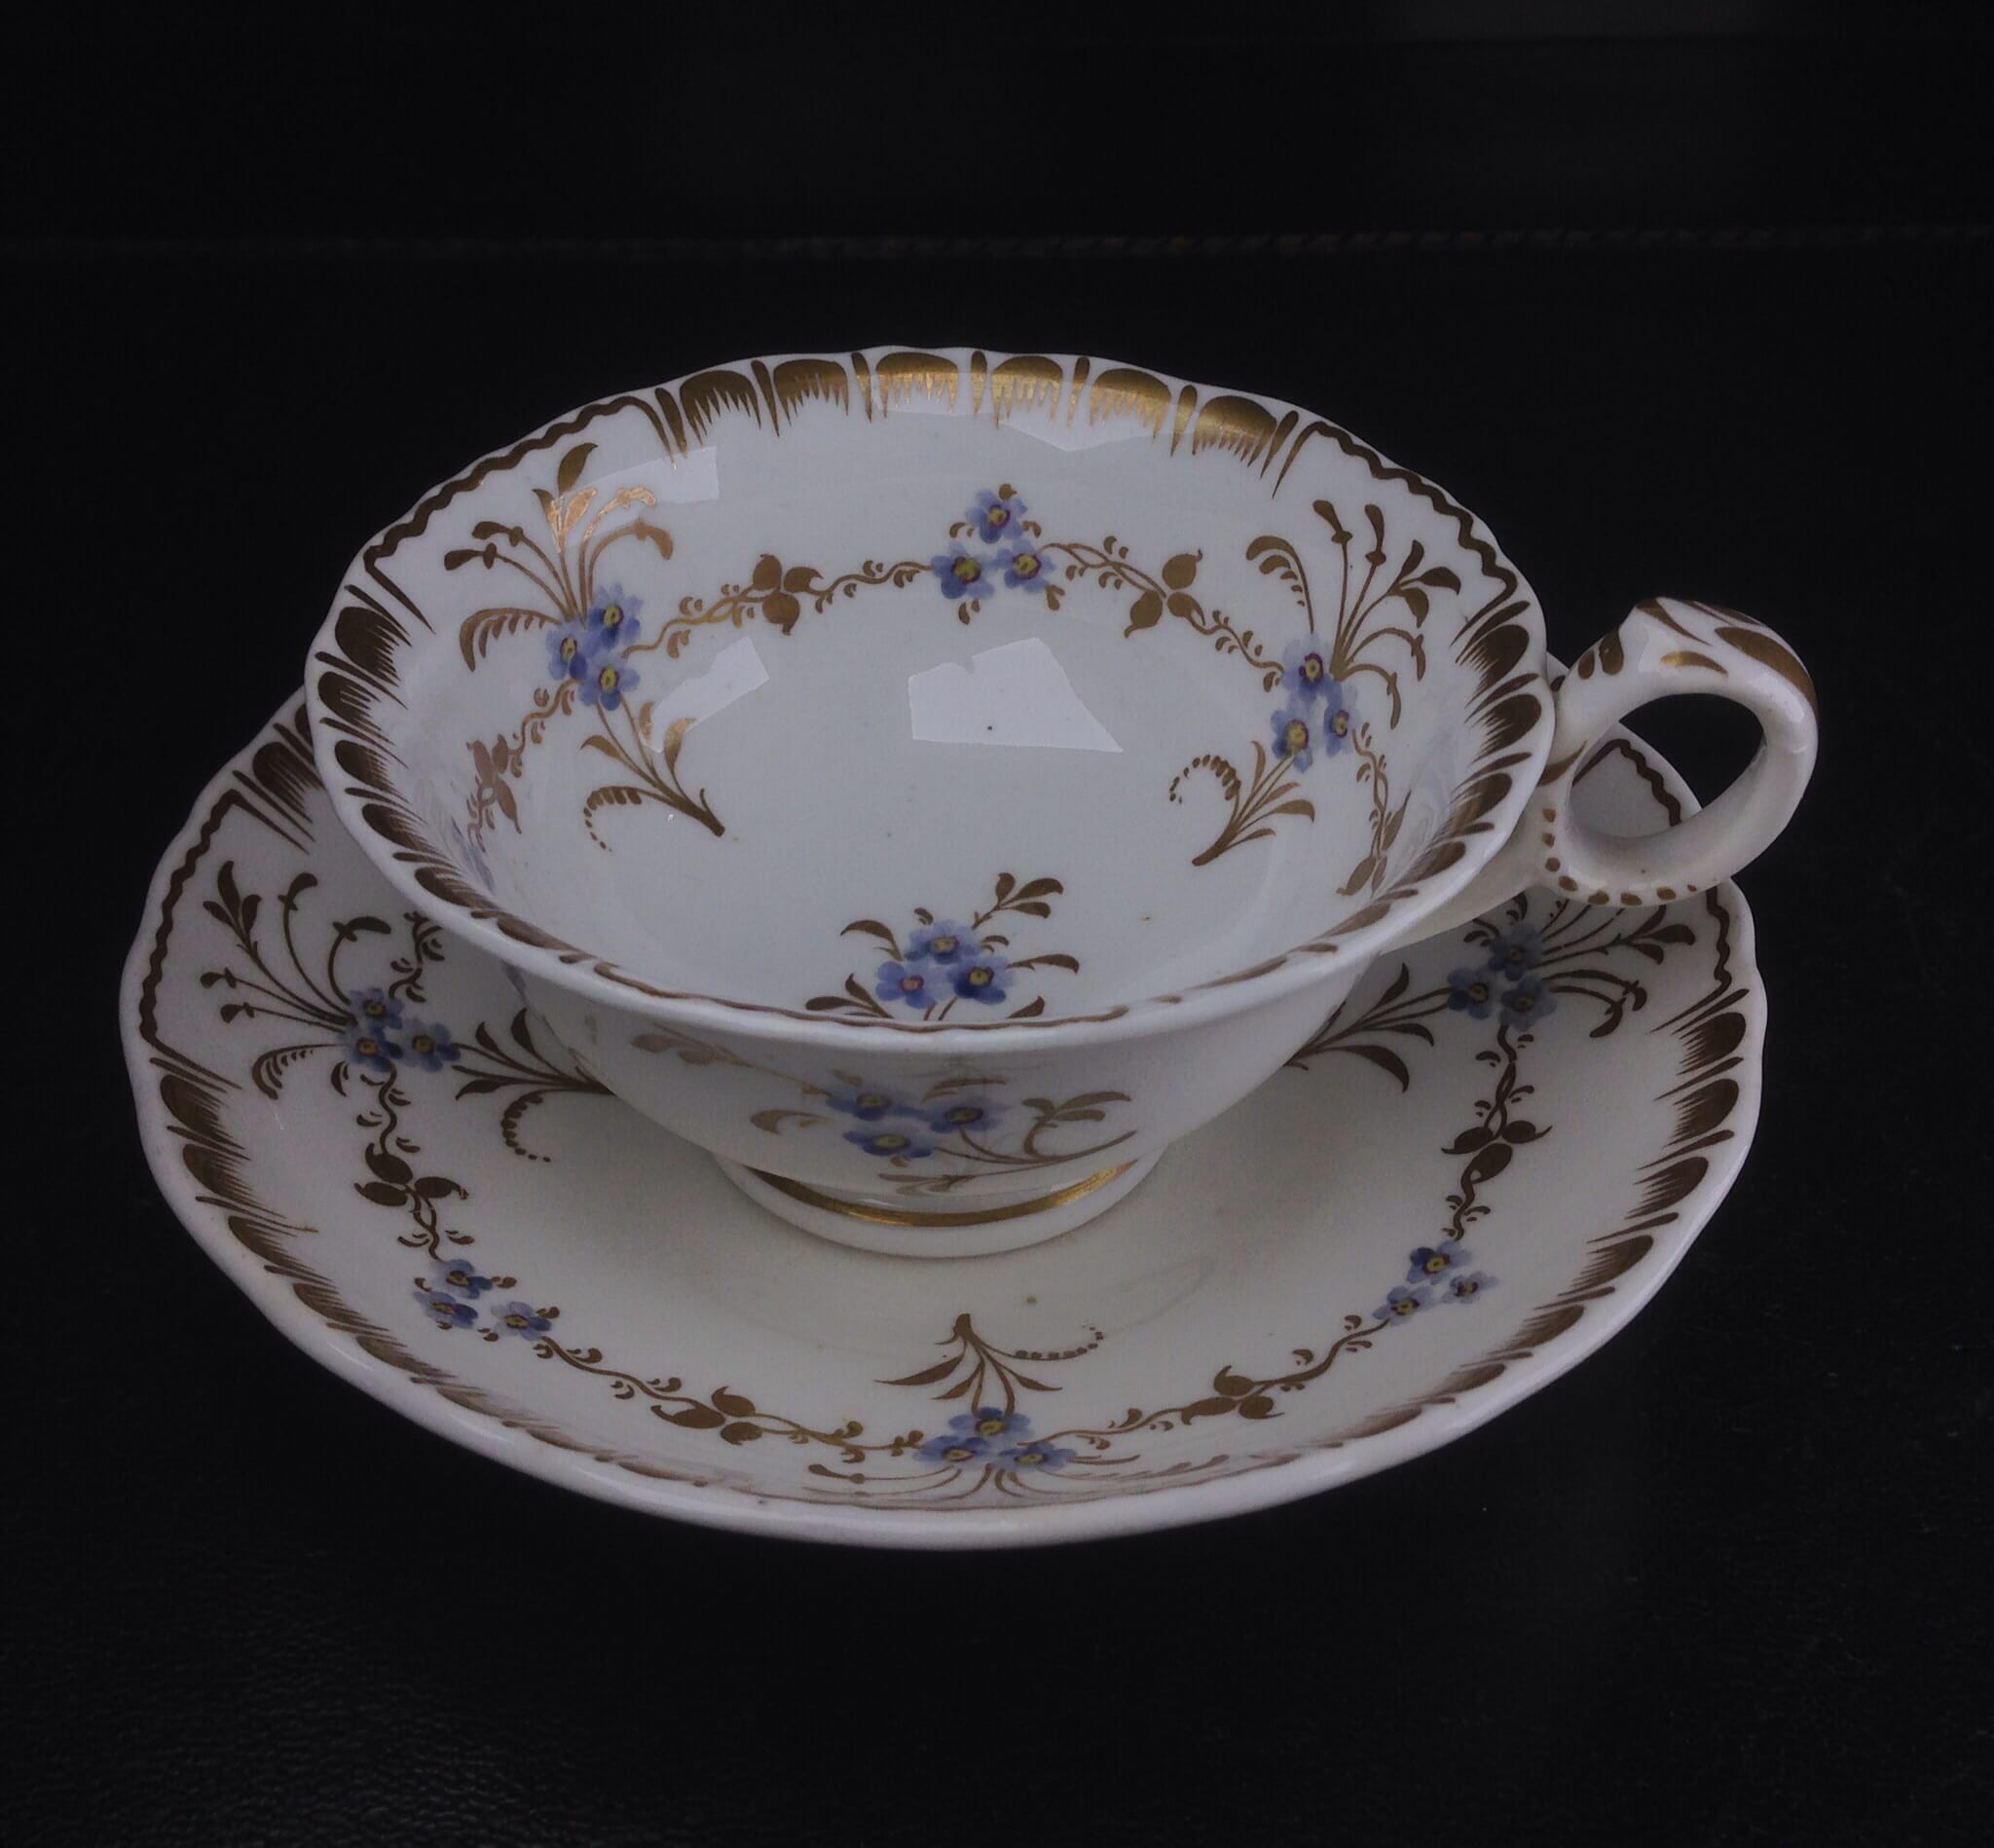 Bowers cup & saucer, pattern 245 - flower sprigs - c.1845-0